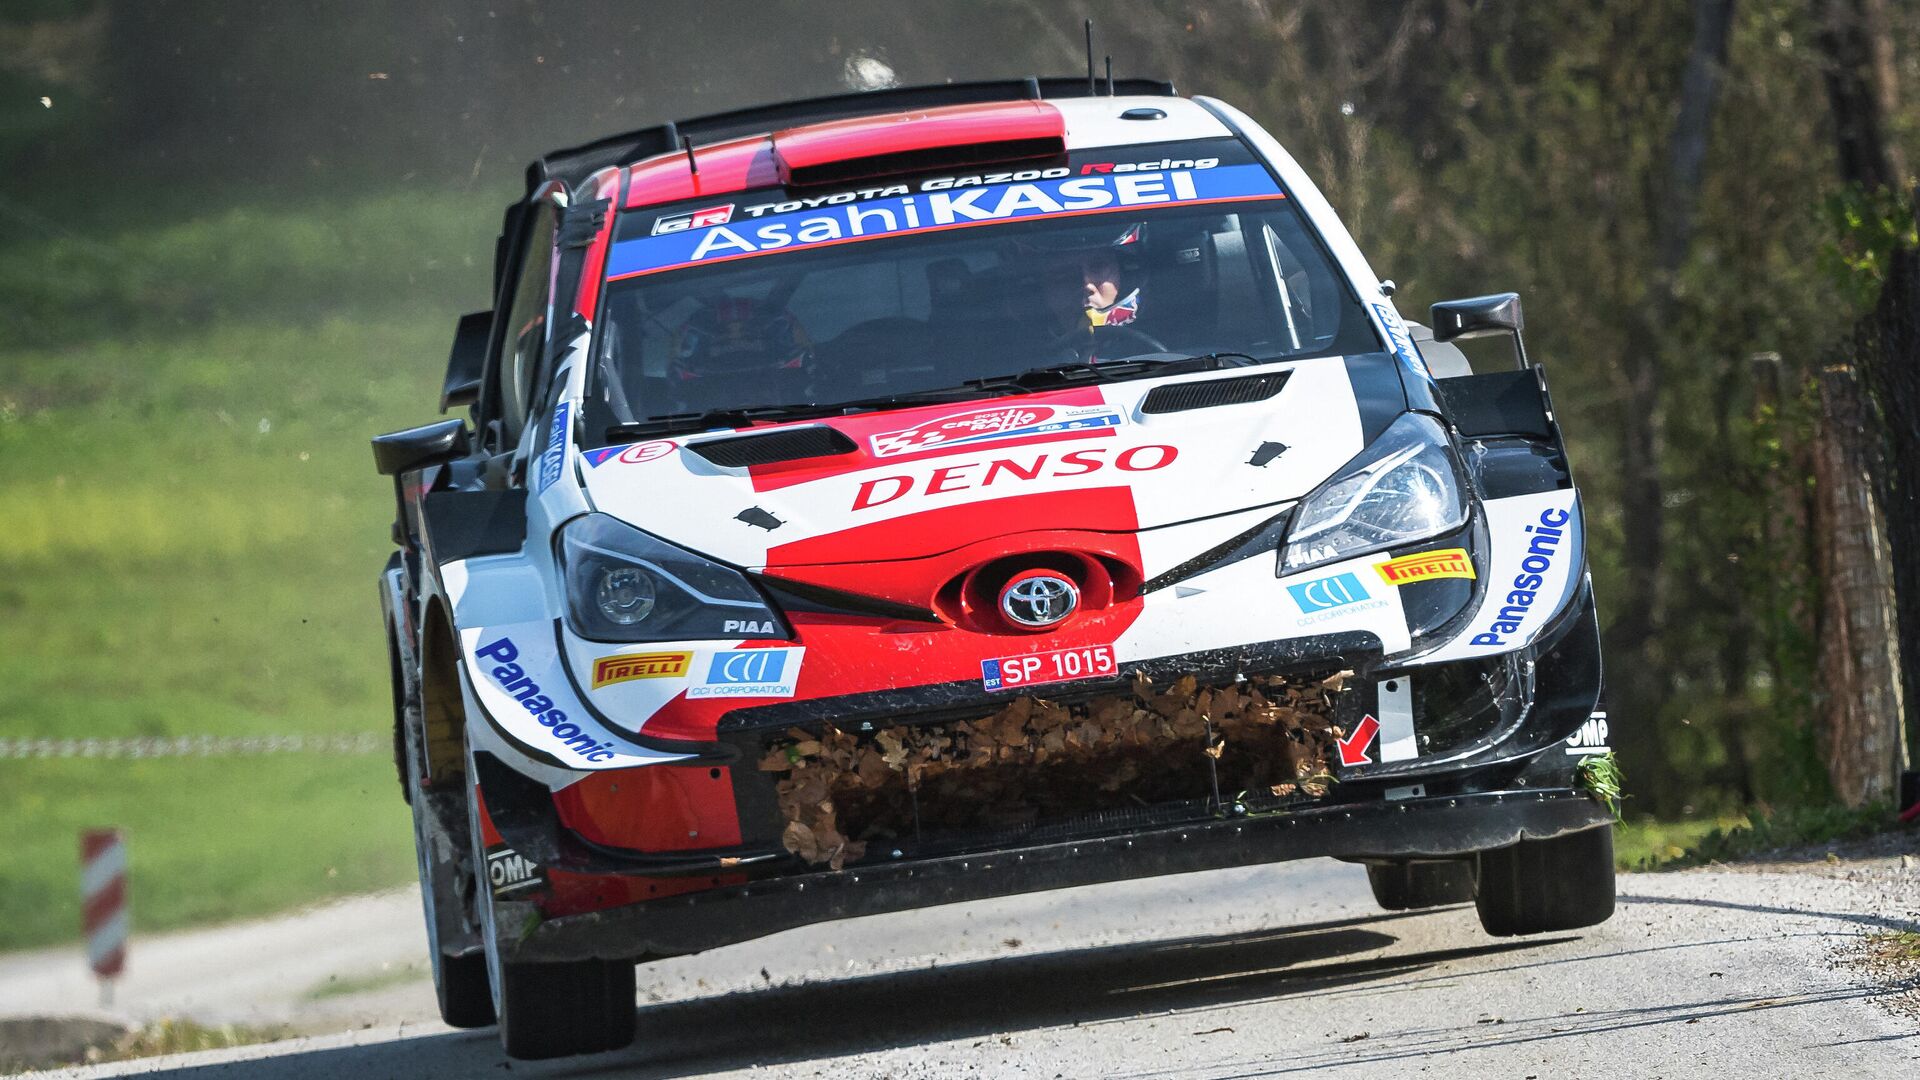 Sebastien Ogier of France and his co-driver Julien Ingrassia of France steer their Toyota Yaris WRC car during the 18th stage of the Croatia Rally, third round of the FIA World Rally Championship on April 25, 2021, in Kumrovec, north of capital Zagreb. (Photo by Andrej ISAKOVIC / AFP) - РИА Новости, 1920, 25.04.2021